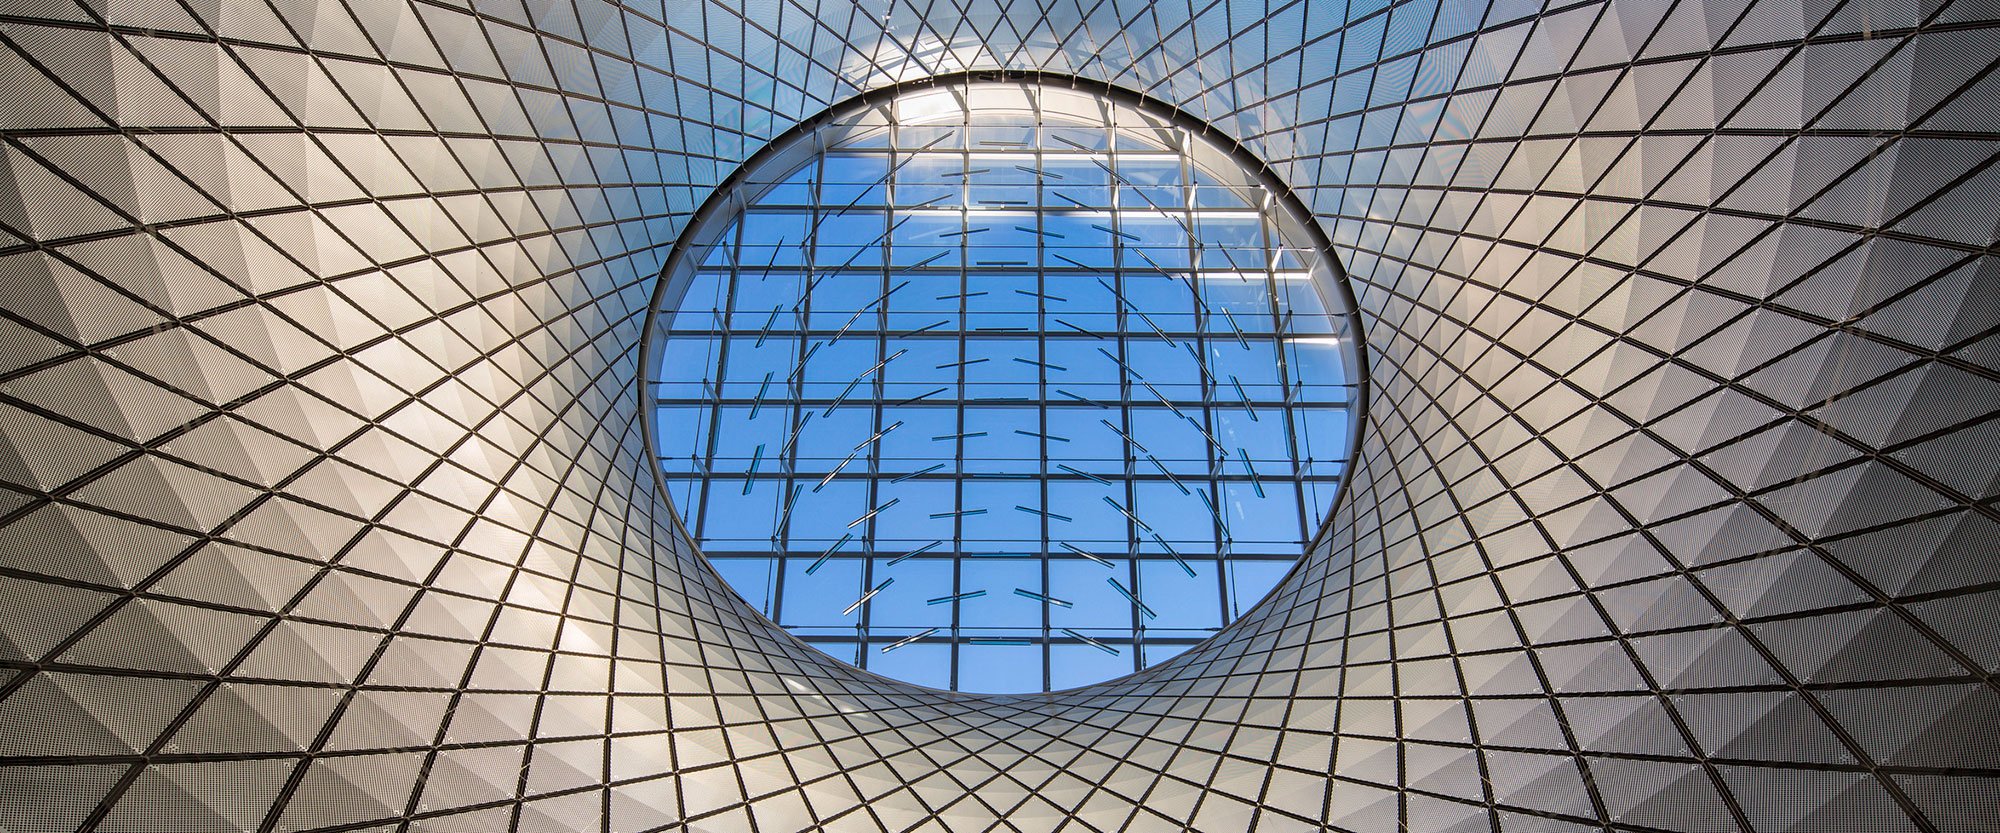 Looking up at the roof of the Fulton Street Transit Center in New York